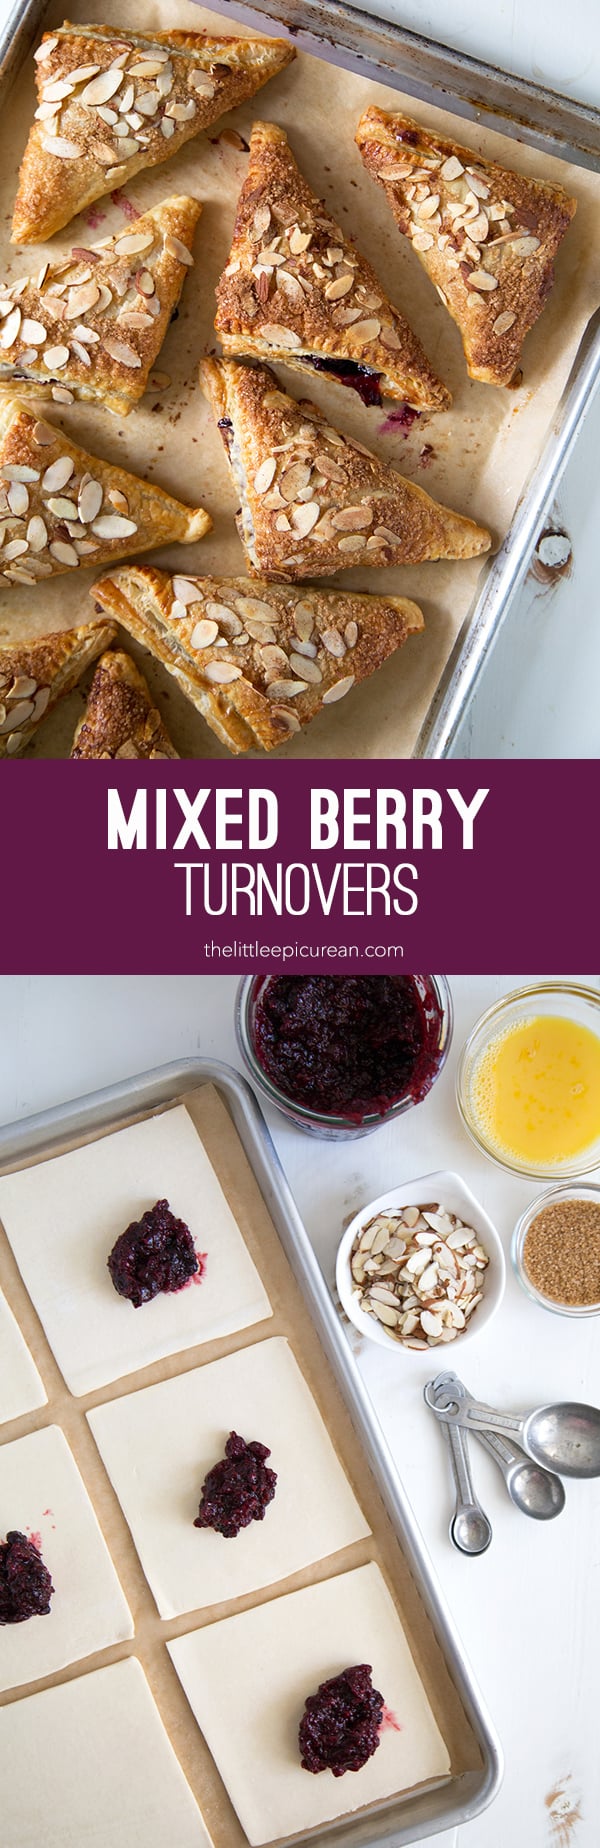 Mixed Berry Turnovers